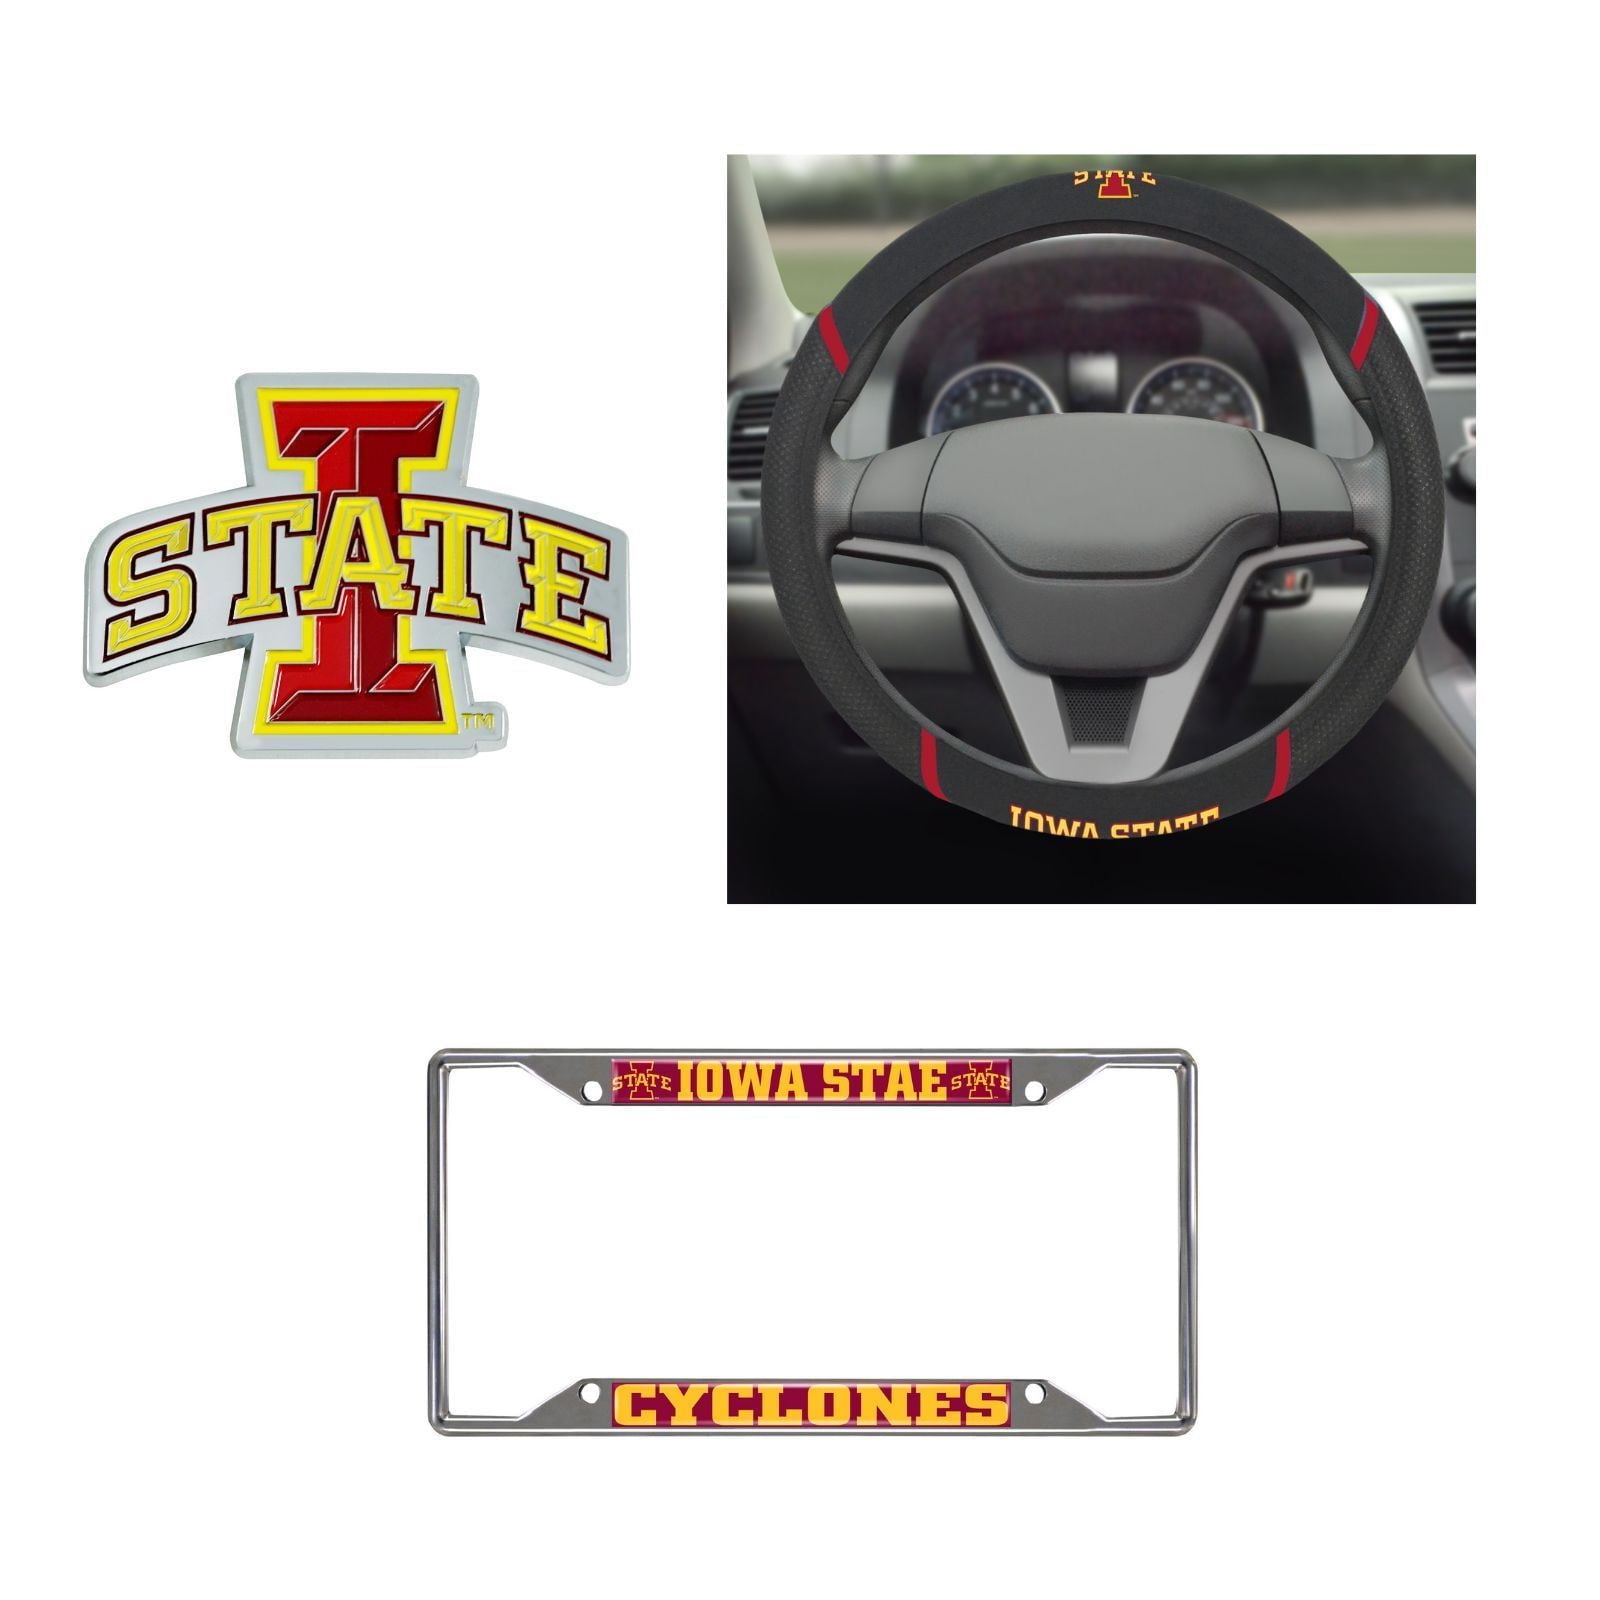 Iowa State Cyclones Steering Wheel Cover, License Plate Frame, 3D Color Emblem